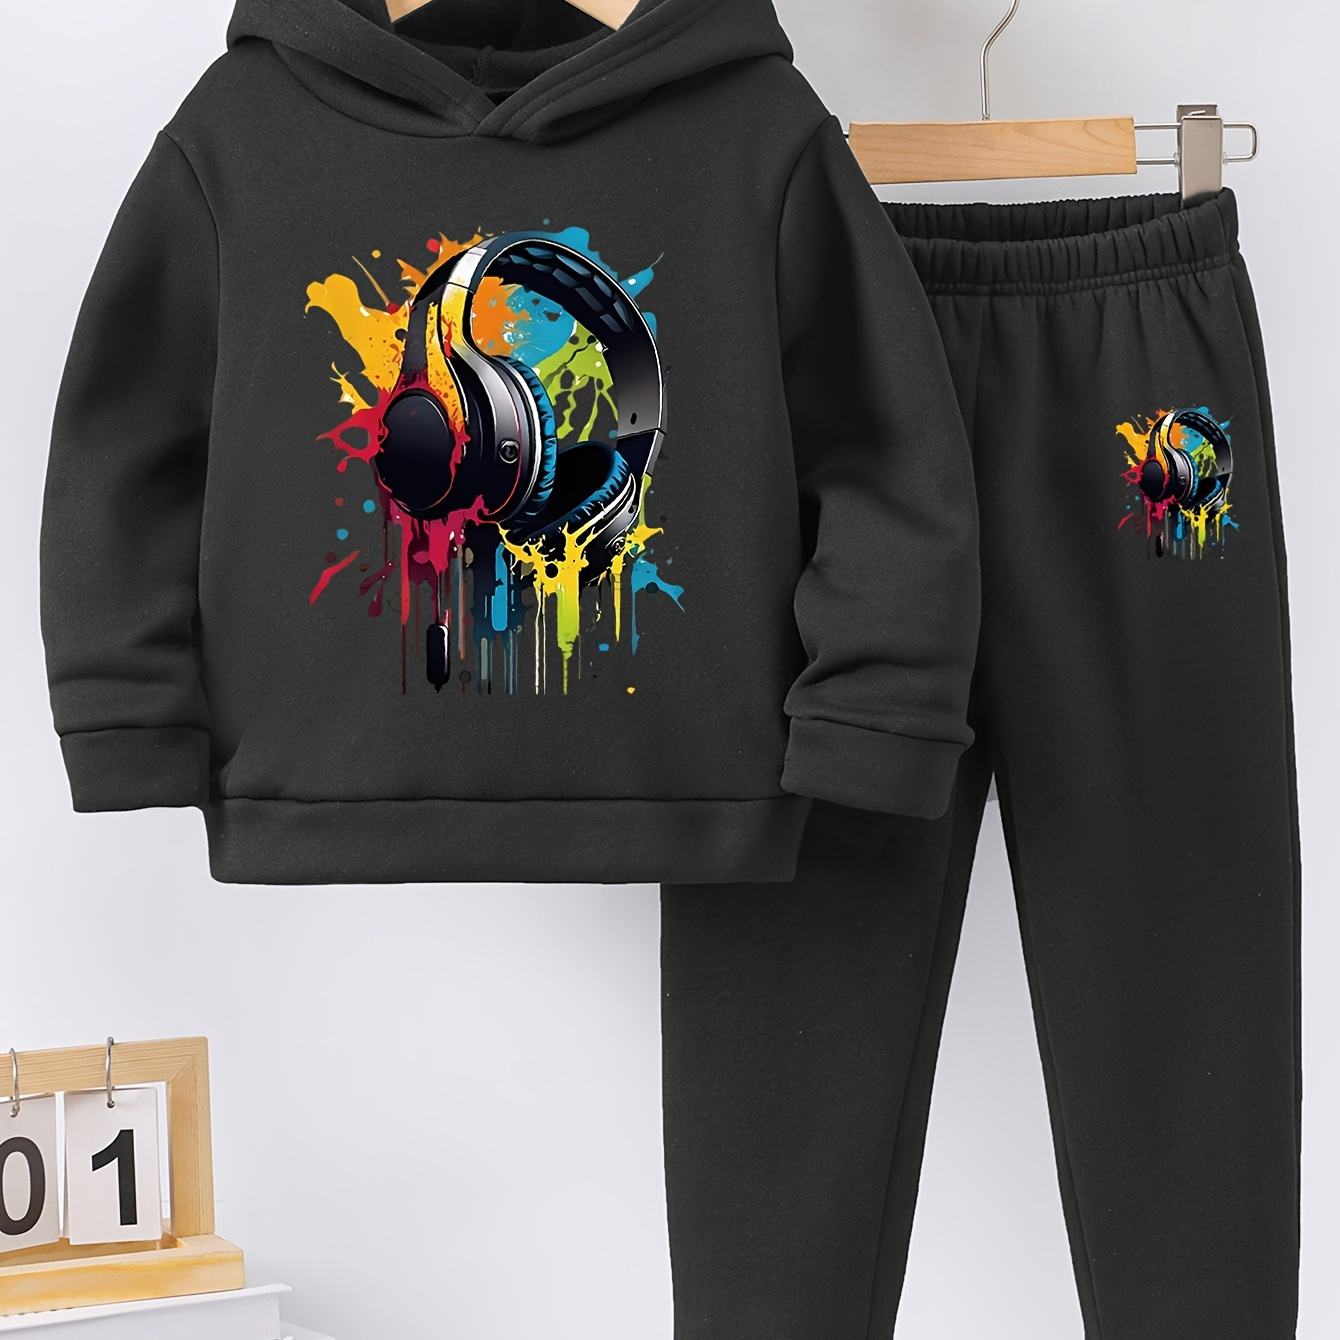 

2pcs Boy's Colorful Headphone Print Hooded Outfit, Hoodie & Pants Set, Kid's Clothes For Fall Winter, As Gift